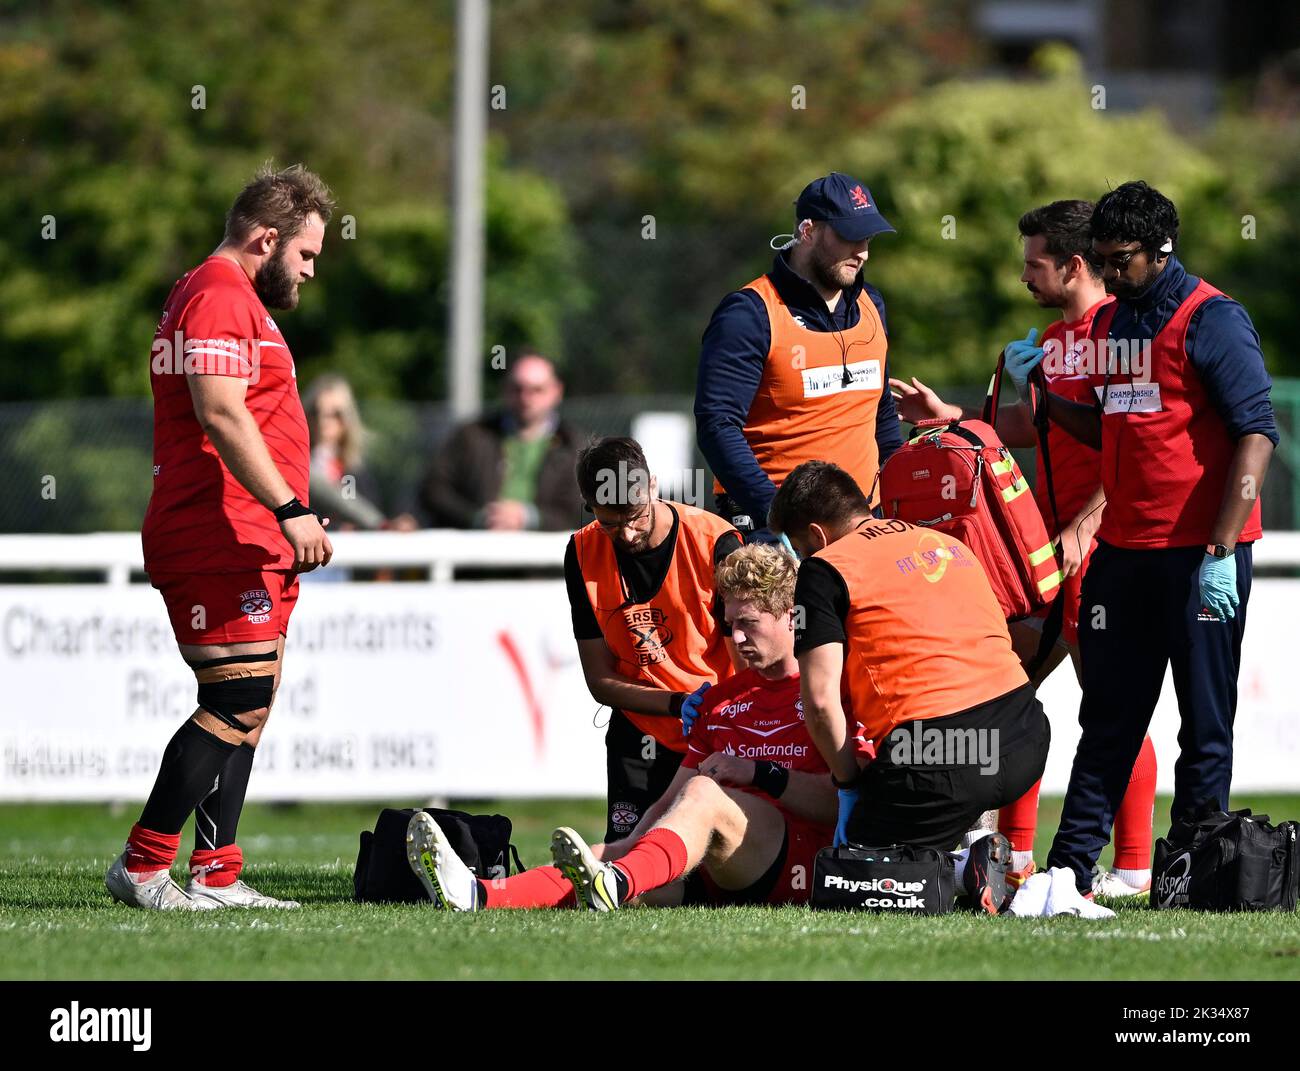 Richmond, United Kingdom. 24th Sep, 2022. Championship Rugby. London Scottish V Jersey Reds. The Richmond Athletic Ground. Richmond. Scott van Breda (Jersey Reds) sits up following treatment after a crunching tackle during the London Scottish V Jersey Reds championship rugby match. Credit: Sport In Pictures/Alamy Live News Stock Photo